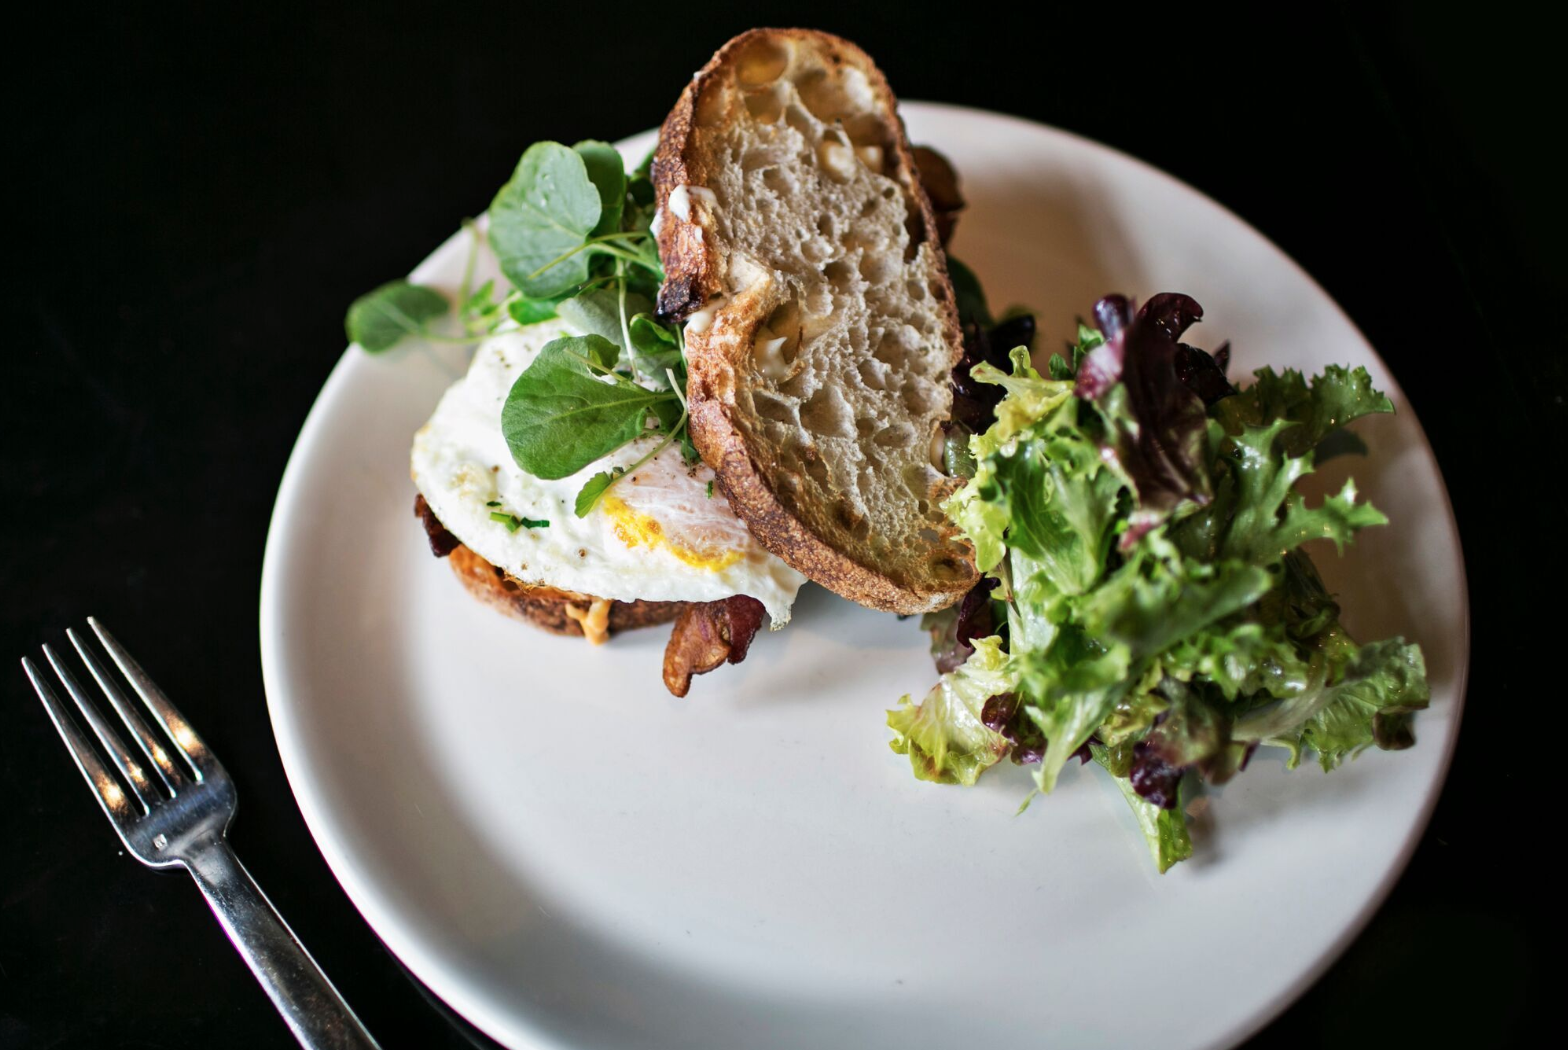 Spend Memorial Day Weekend at TWO and PARISH’s BeltLine Brunch